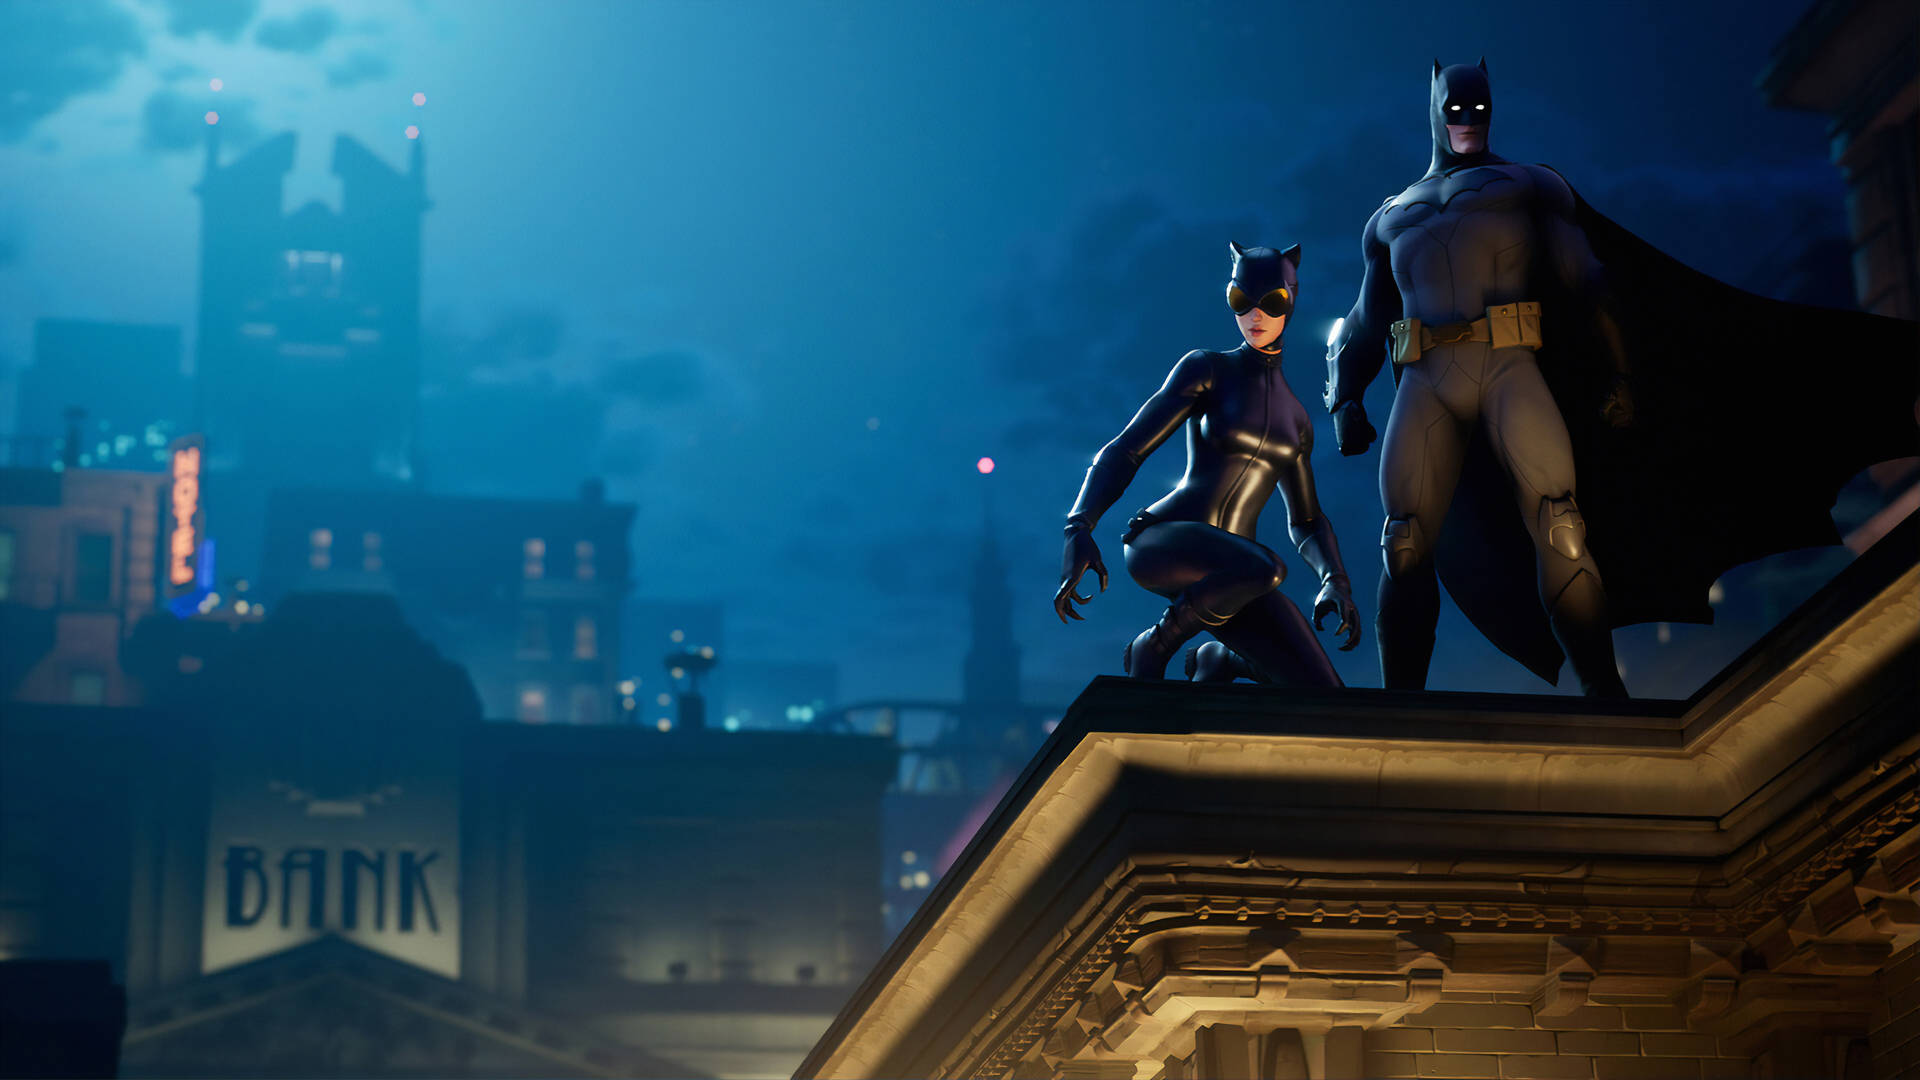 Catwoman And Batman In Fortnite Background